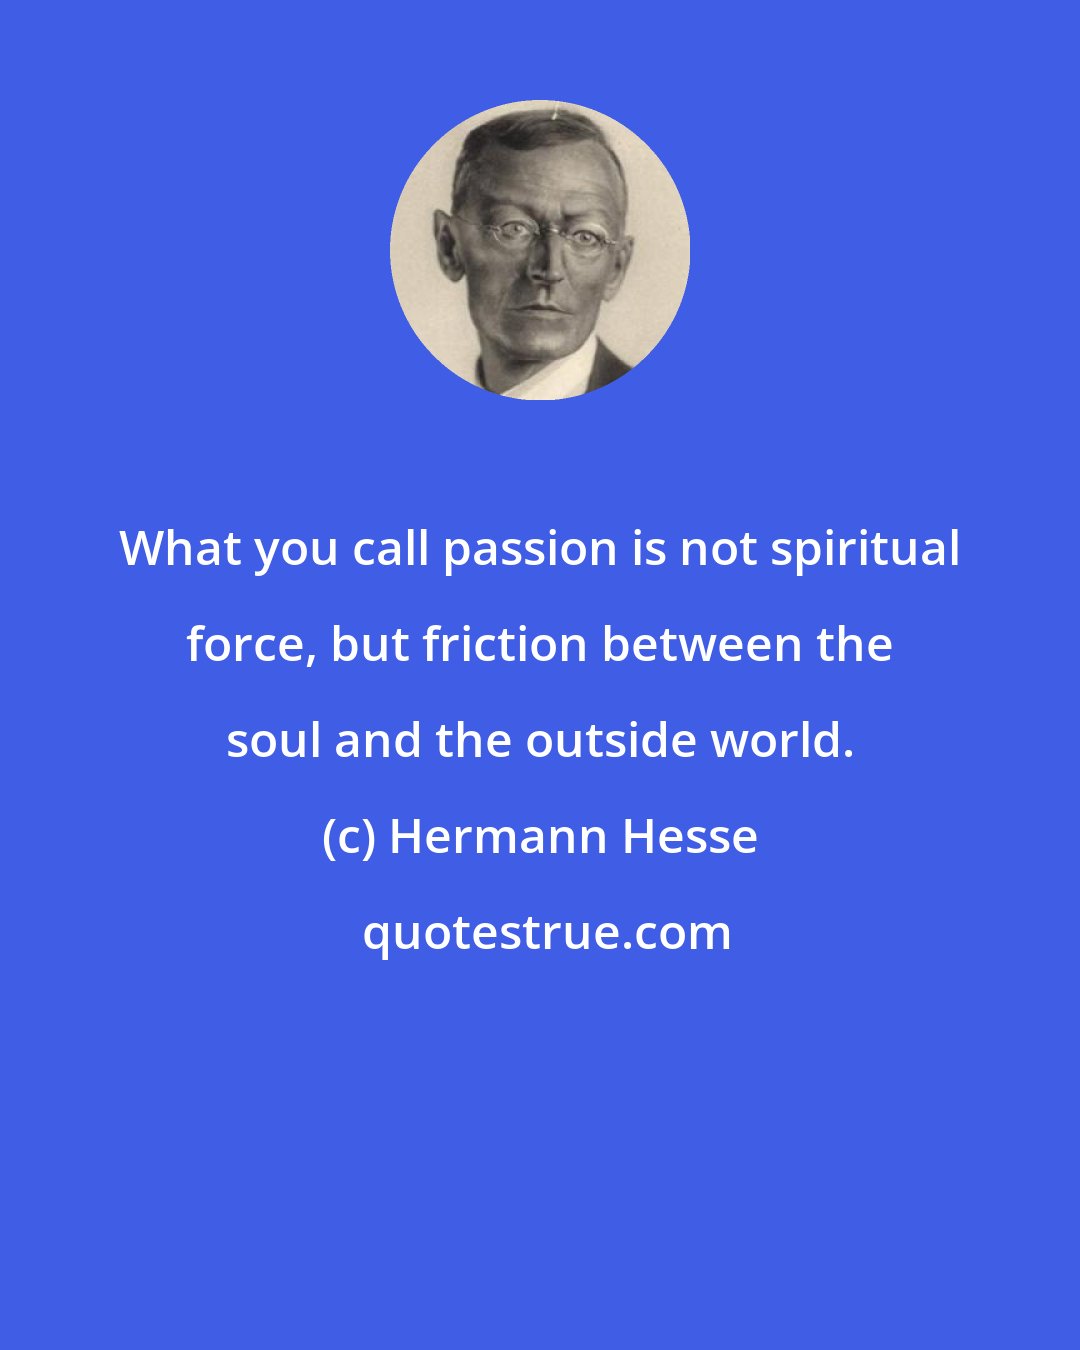 Hermann Hesse: What you call passion is not spiritual force, but friction between the soul and the outside world.